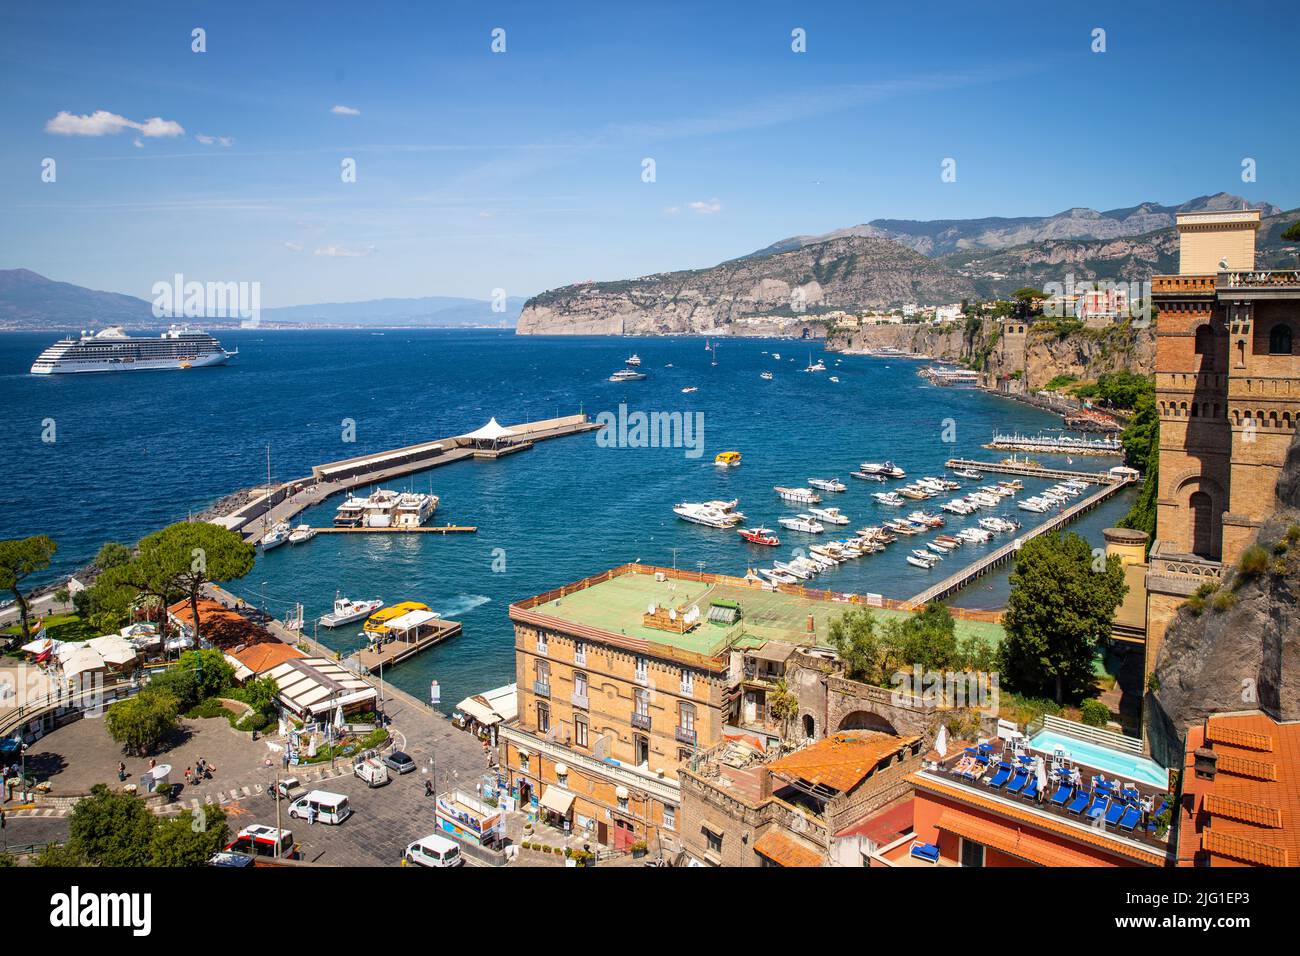 View of the port of Sorrento Stock Photo